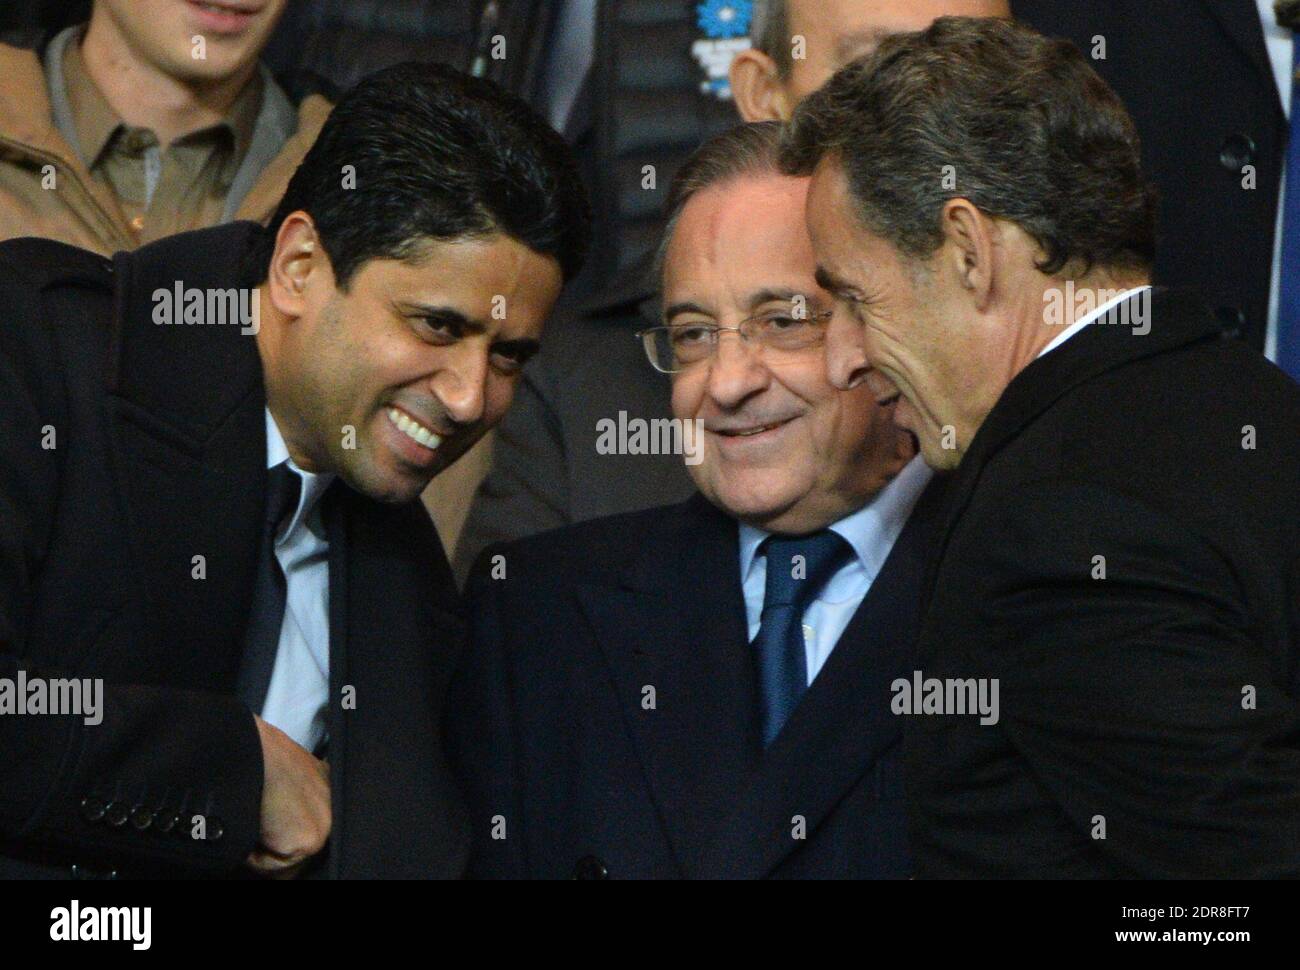 Nasser Al Khelaifi, Real Madrid's President Florentino Perez and Nicolas Sarkozy during the UEFA Champions League soccer match, Group A, Paris Saint-Germain (PSG) Vs Real Madrid CF at Parc des Princes stadium in Paris, France on October 21, 2015. Photo by Christian Liewig/ABACAPRESS.COM Stock Photo